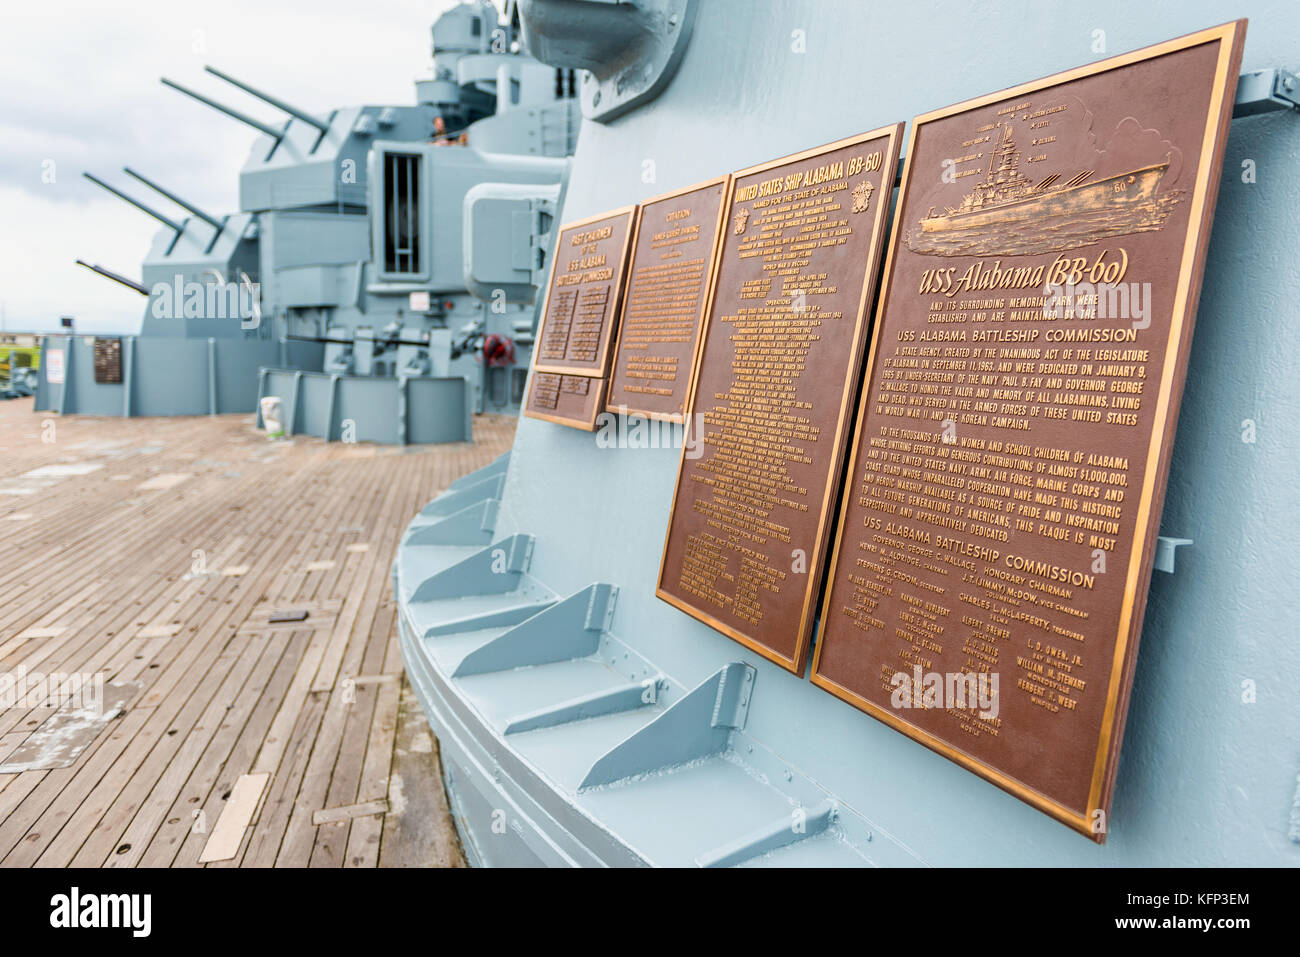 Memorial Plaques on The USS Alabama Battleship at the Memorial Park in Mobile, Alabama, USA Stock Photo